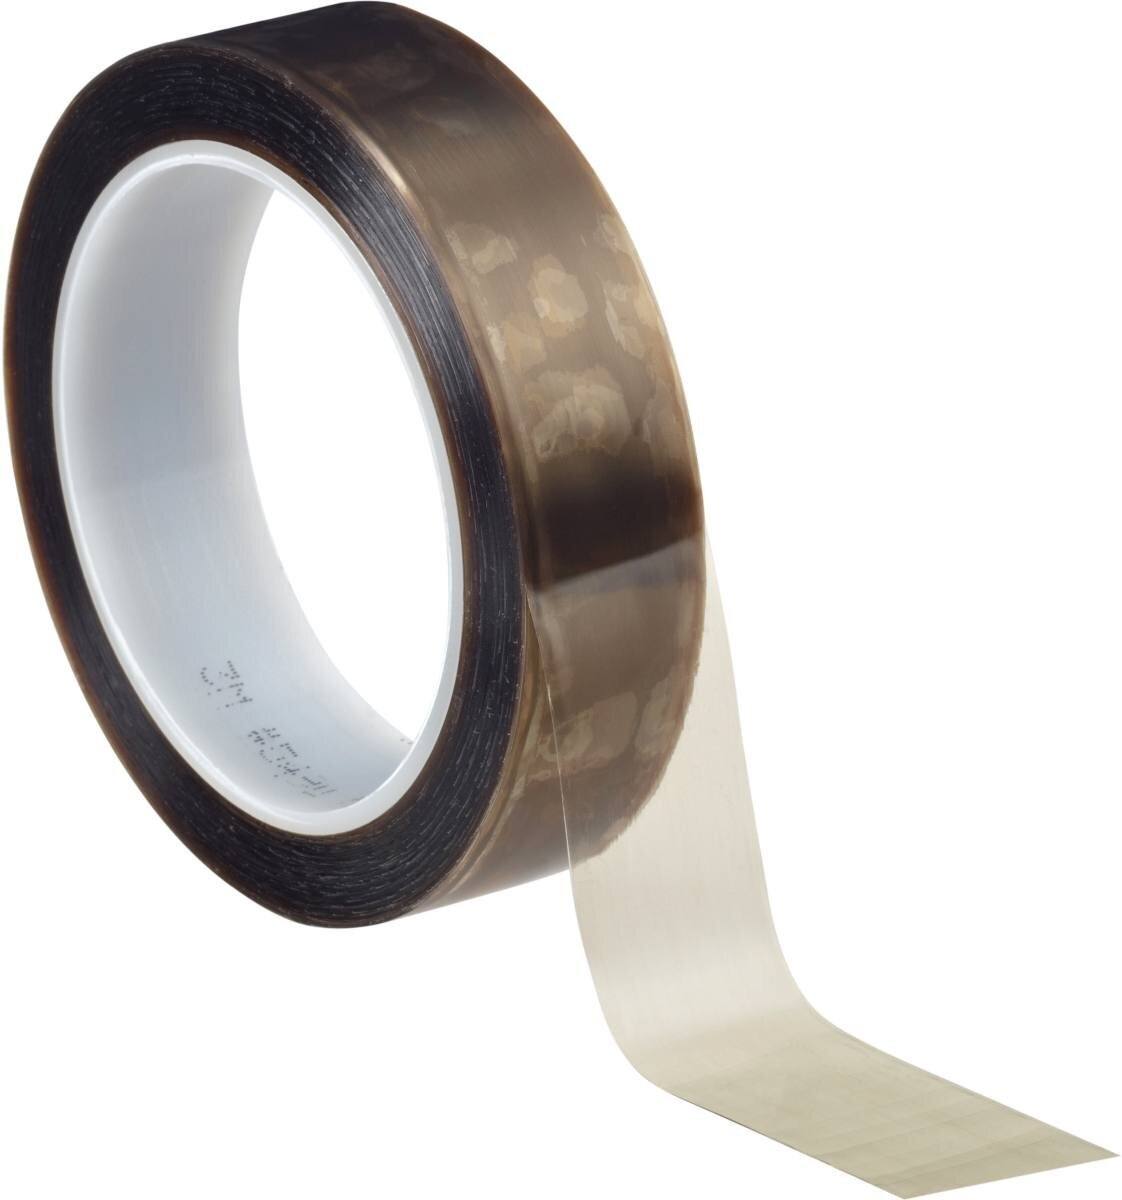 3M 5490 PTFE extruded film adhesive tape 25mmx33m, 0.09mm, silicone